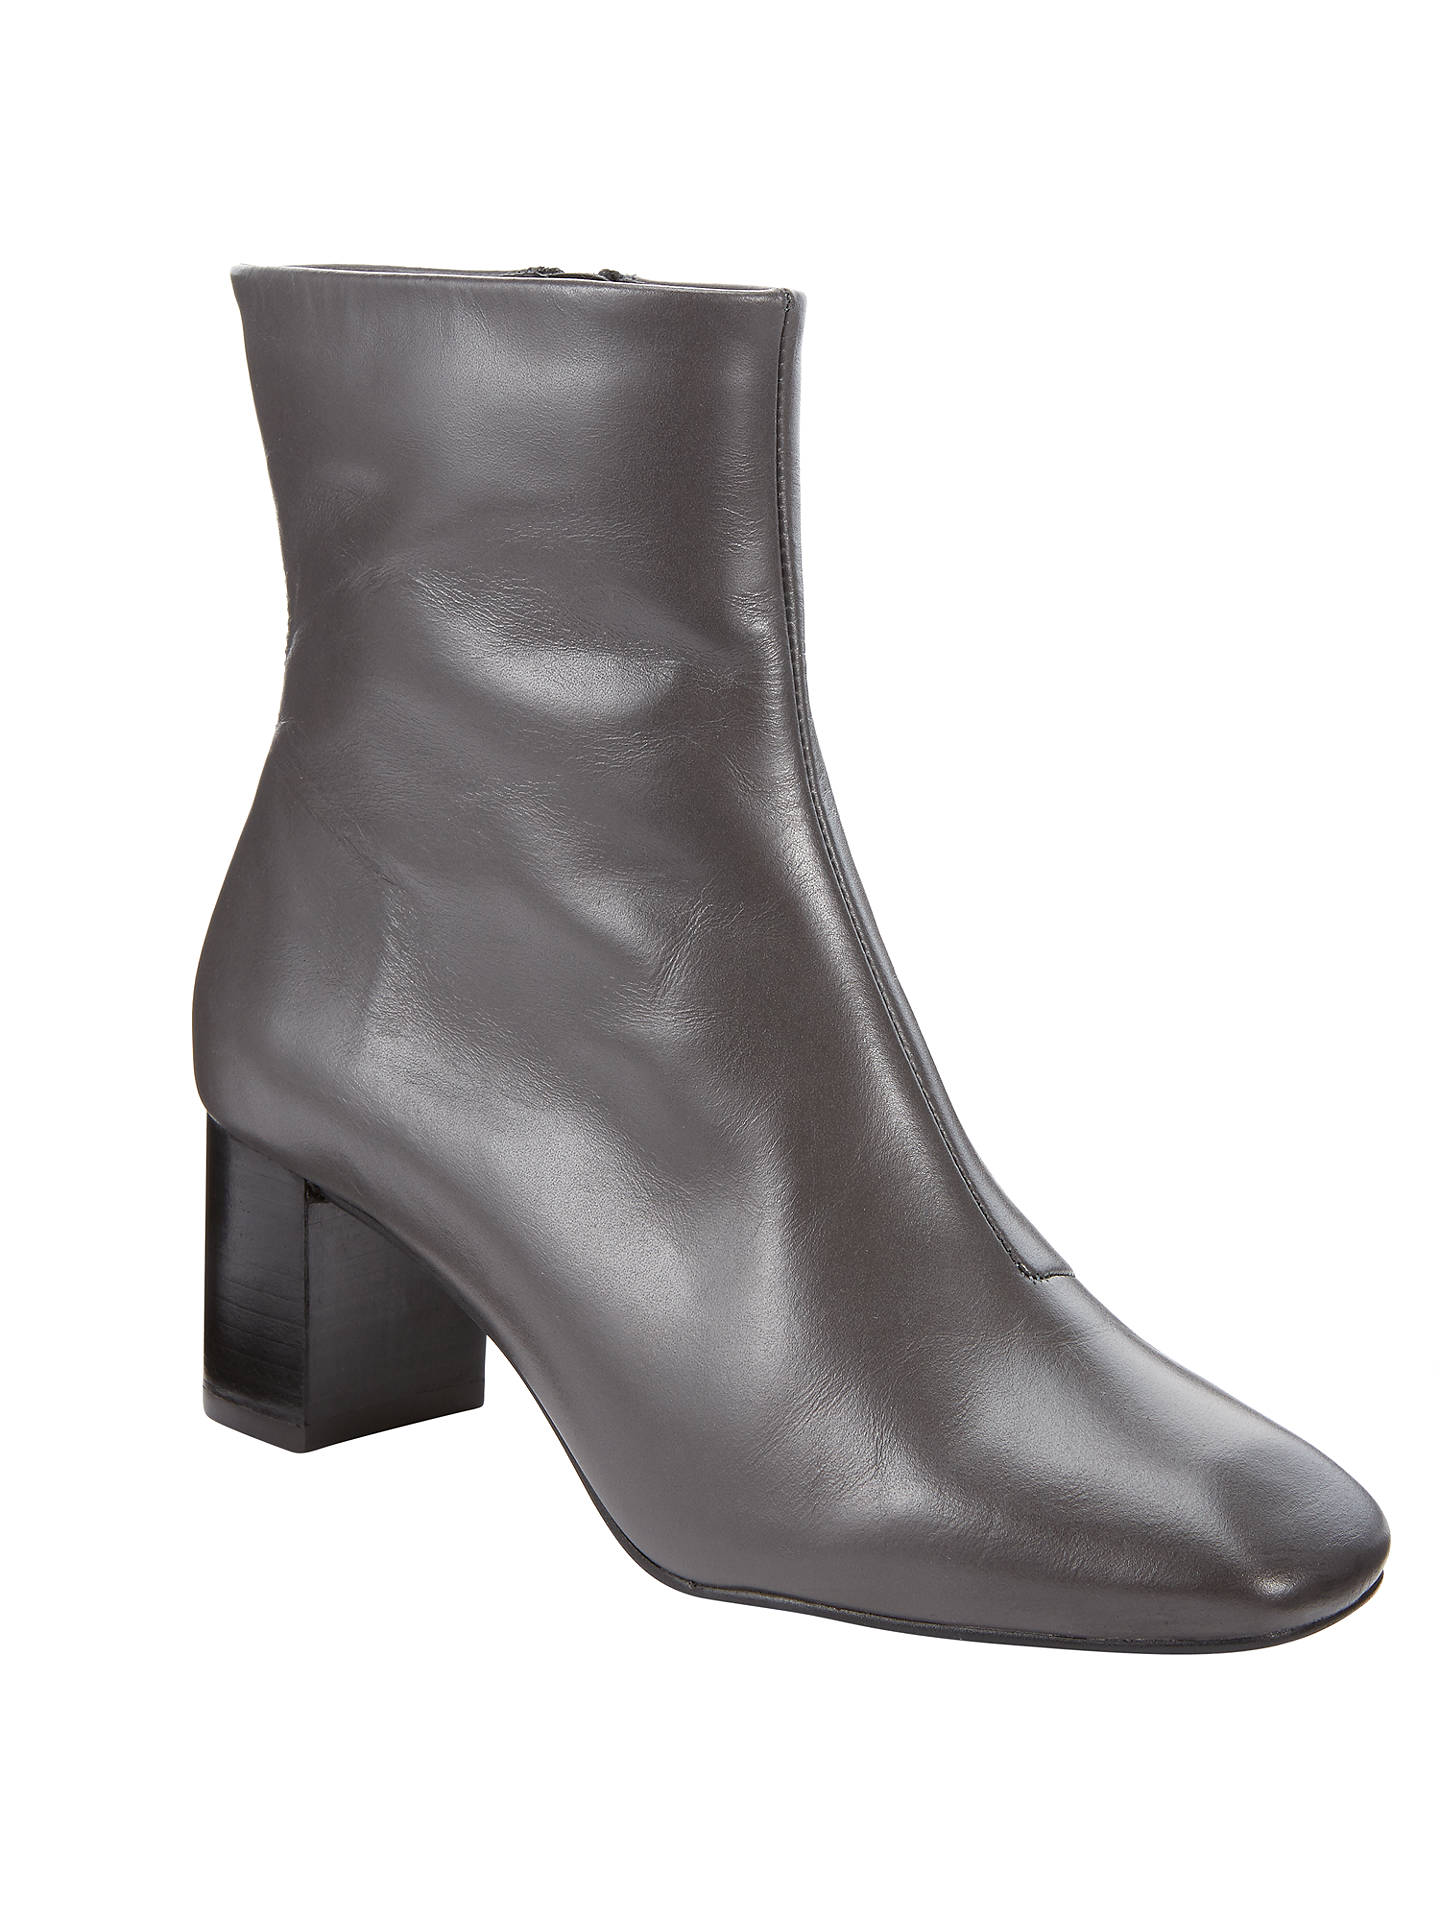 Kin Pernille Block Heeled Ankle Boots, Grey at John Lewis & Partners